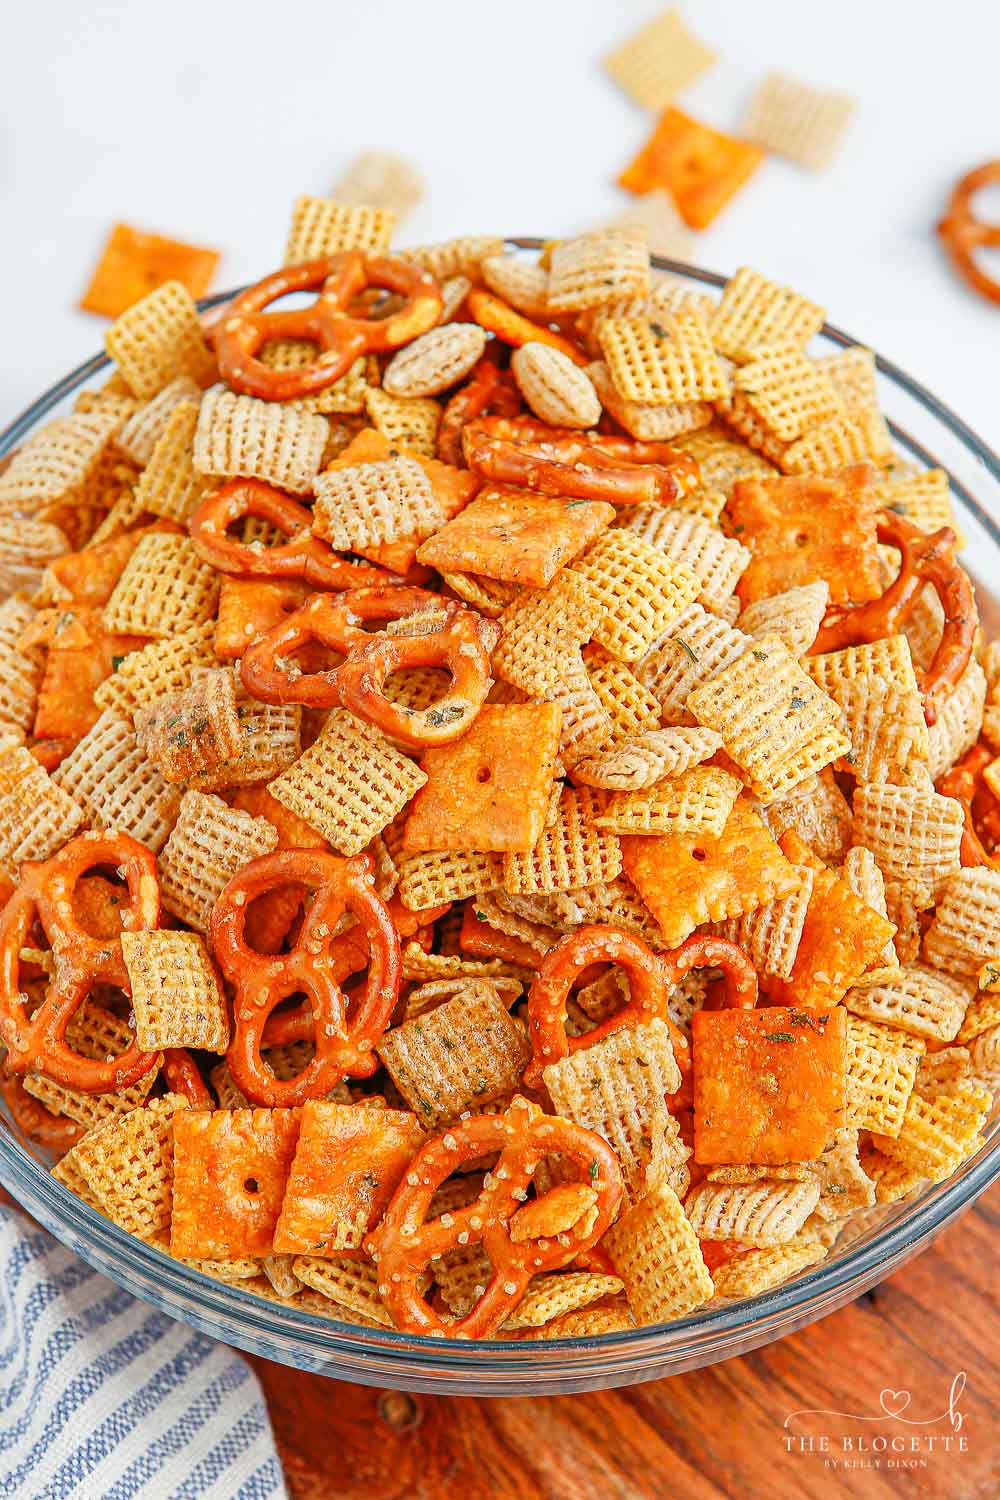 Ranch Chex Mix is an easy snack recipe made with Chex cereal, pretzels, and Cheez-Its! It's wonderful for get-togethers any time of the year.